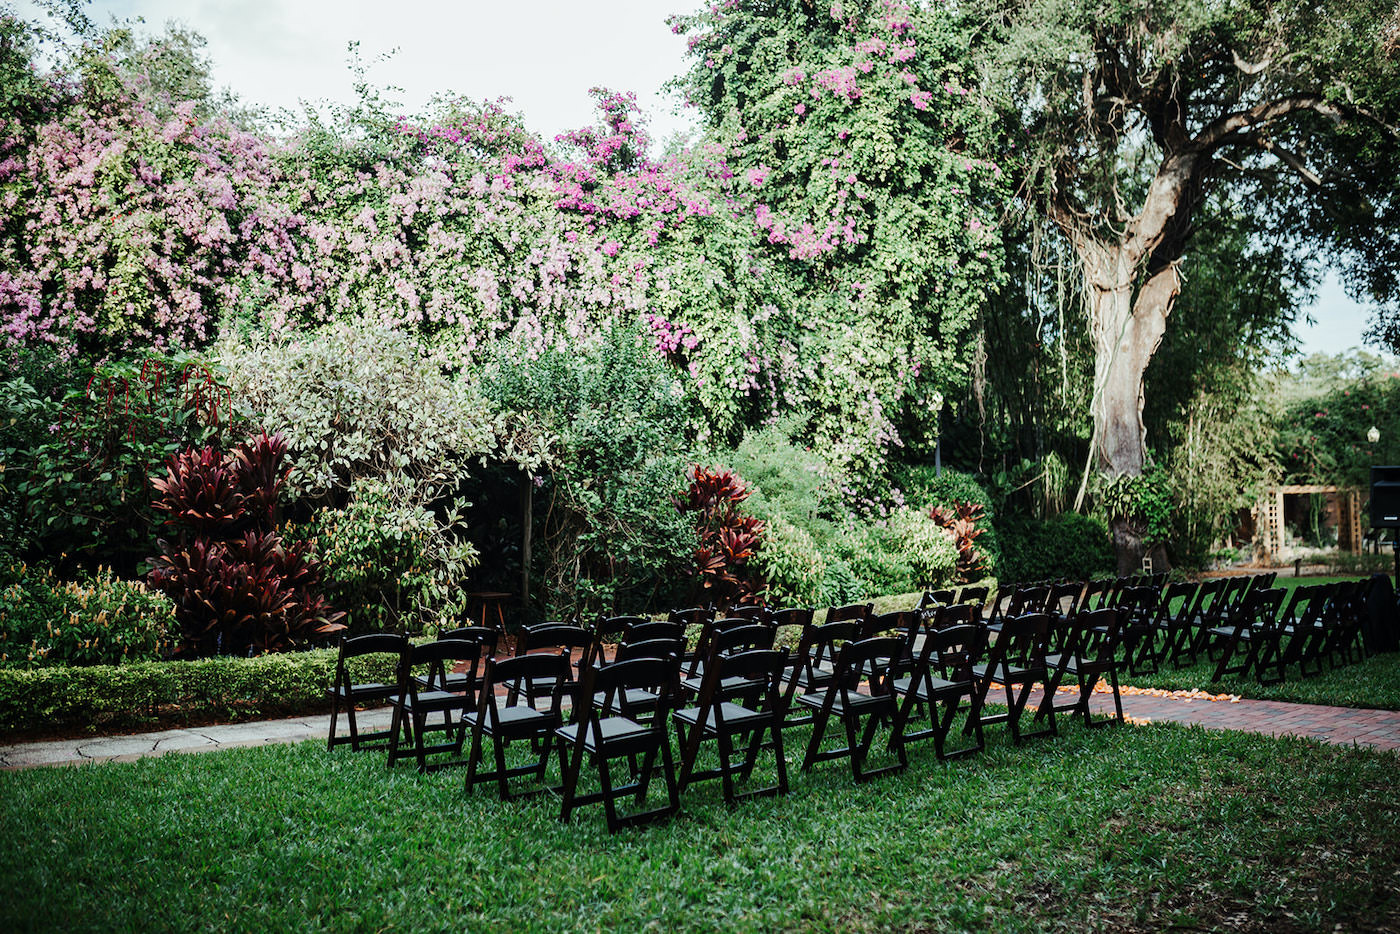 Outdoor Wedding Ceremony with Black Wooden Folding Chairs at St. Petersburg Wedding Venue Sunken Gardens | Tampa Wedding Planner Kelly Kennedy Weddings and Events